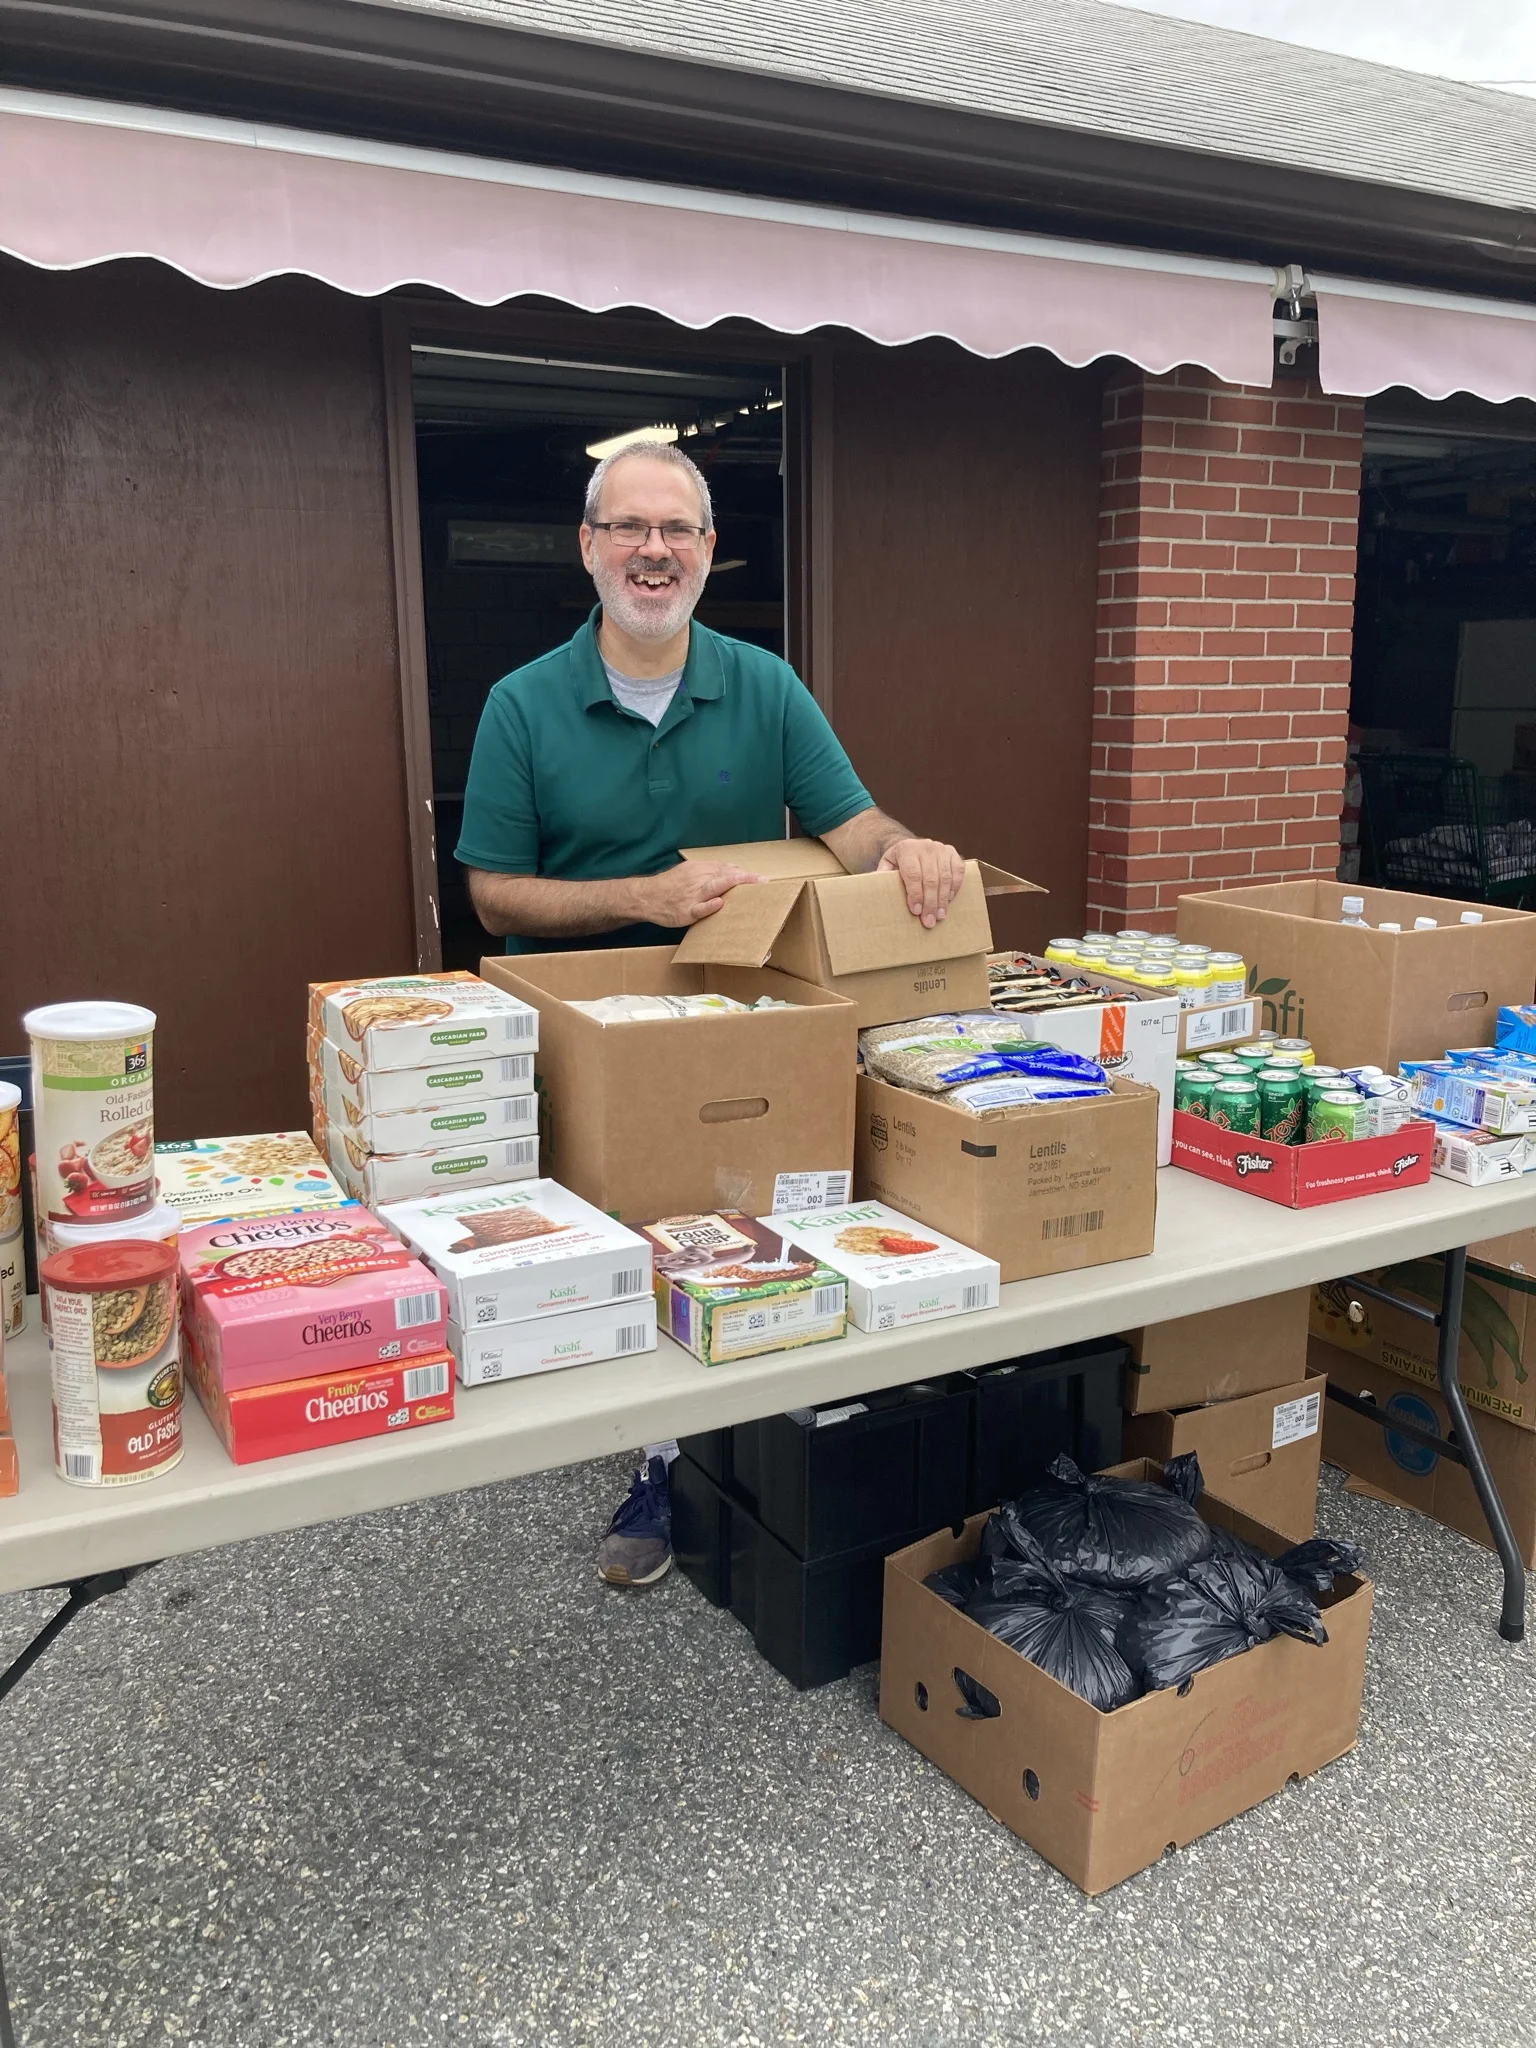 Man in green shirt standing over a table full of food in boxes like cereal, soup, and other non perishable items